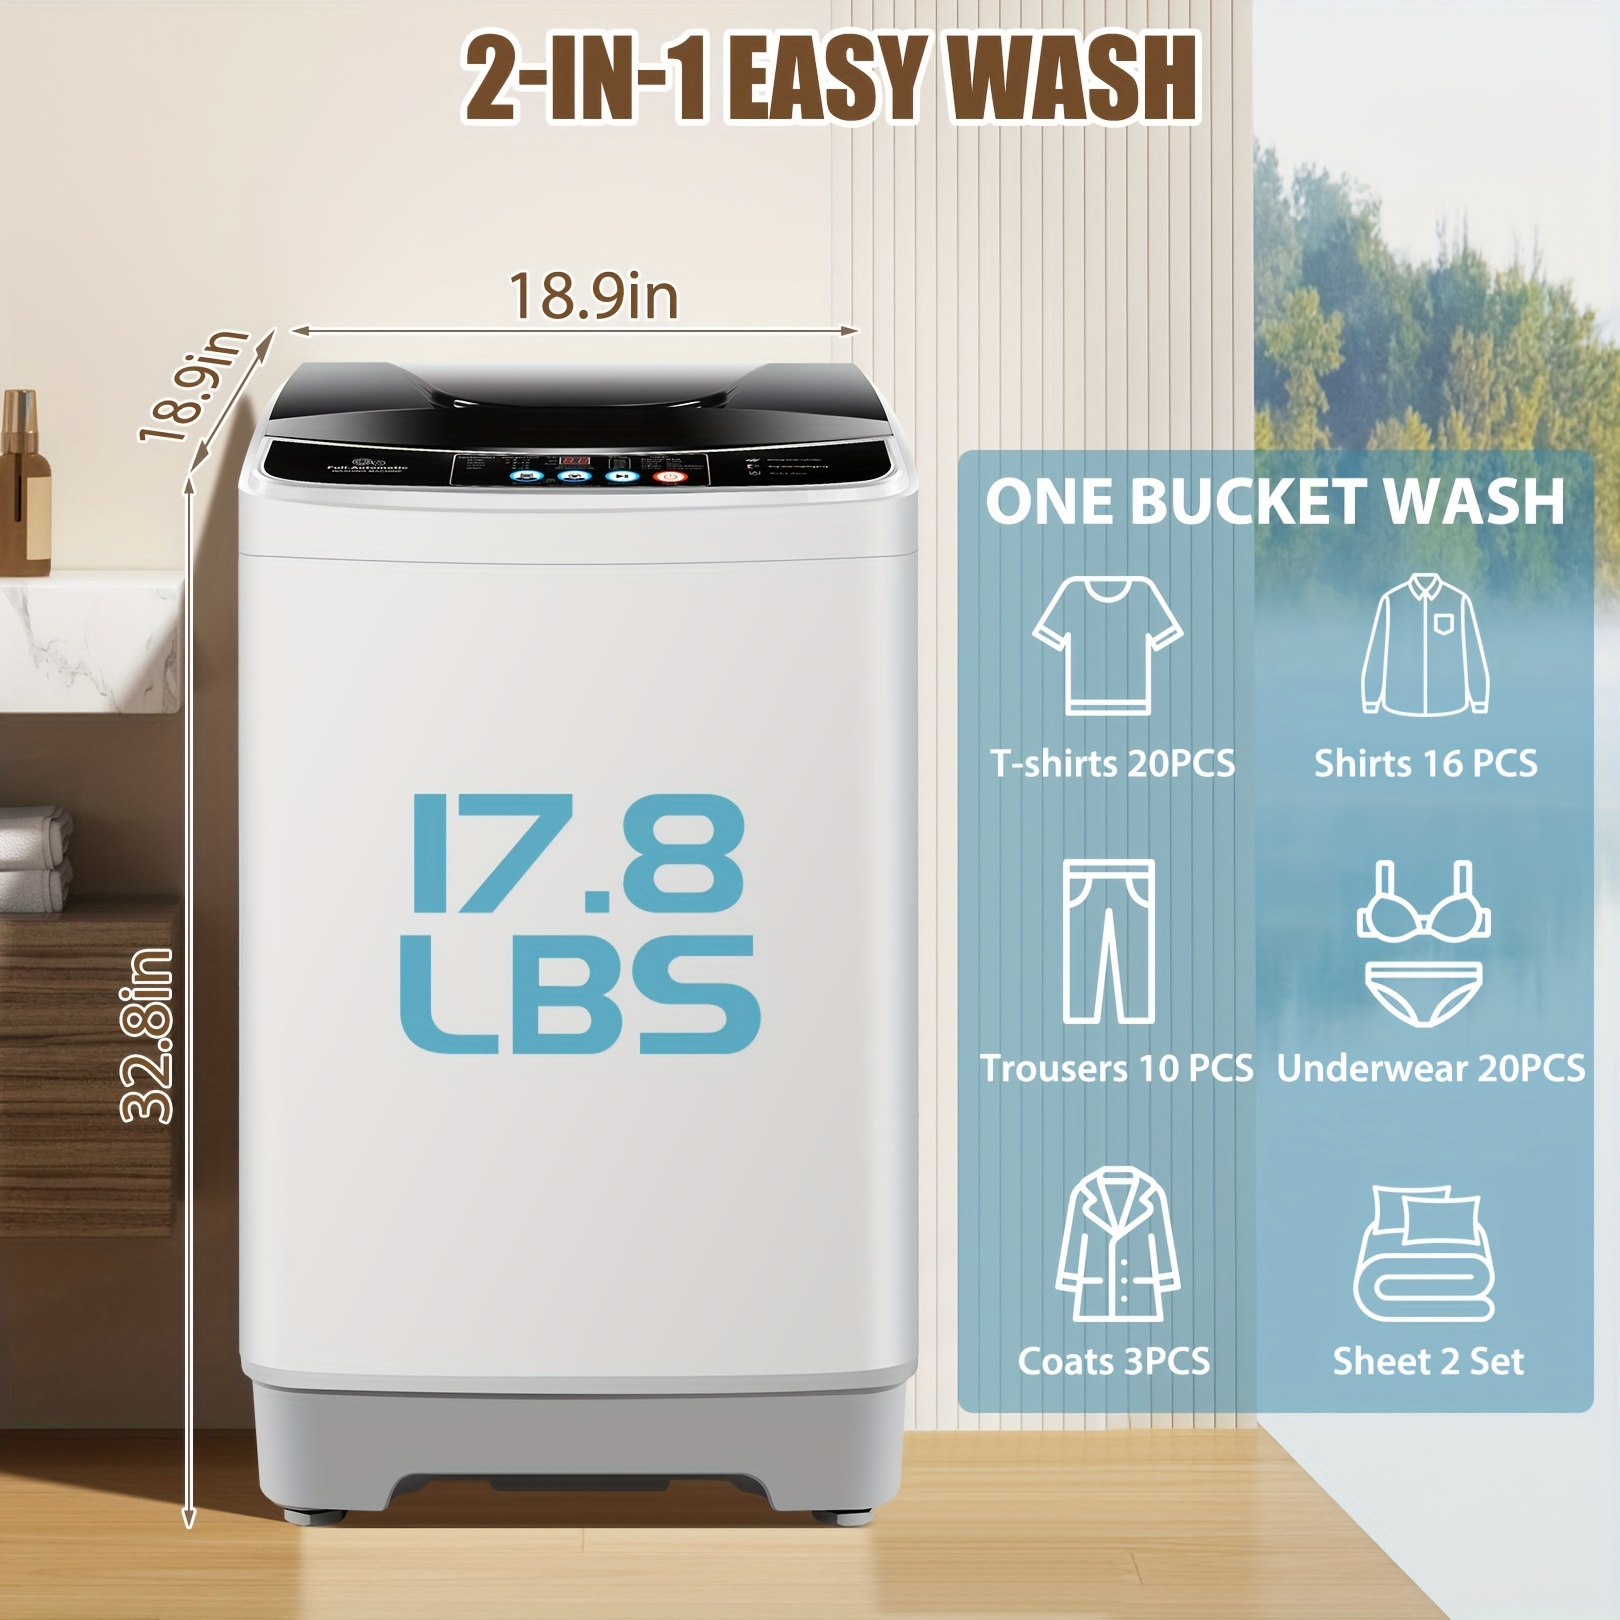 

17.8lbs Capacity, 2.4 Cu.ft Full-automatic Portable Washer Machine With 10 Programs & 8 Water Levels Selections, Low Noise, Led Display, Washing Machine For Apartment, Home, Dorms